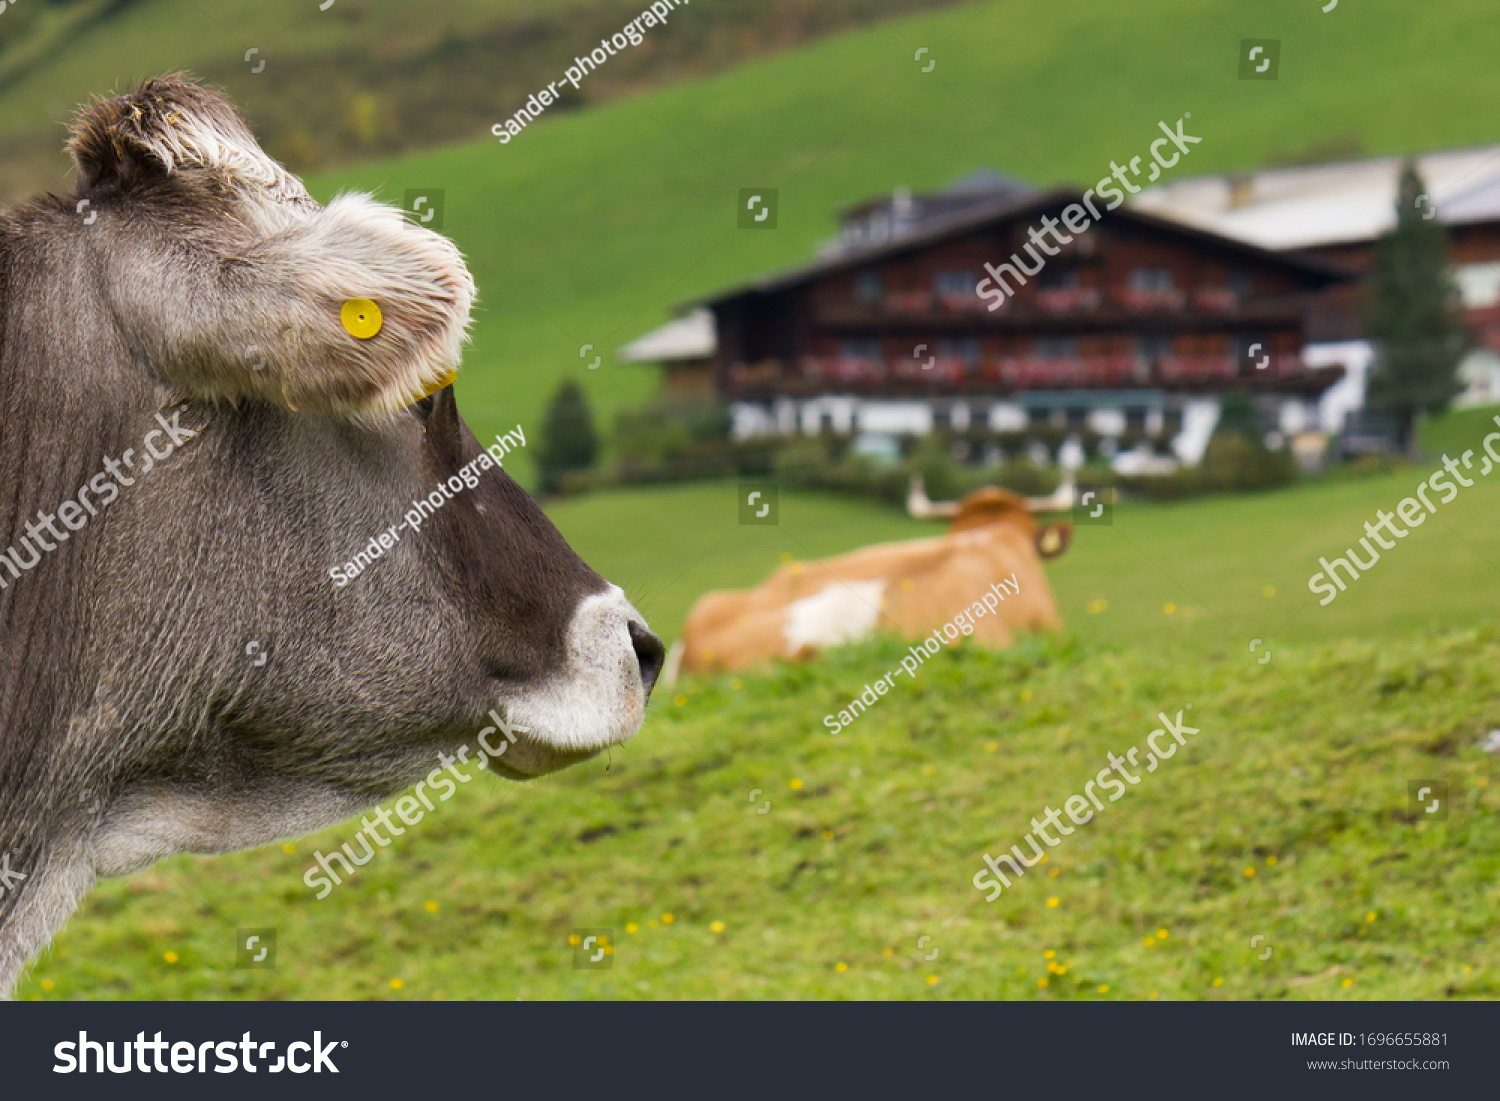 Austrian cow (Bos Taurus) looking to farmstead with blurred background #1696655881